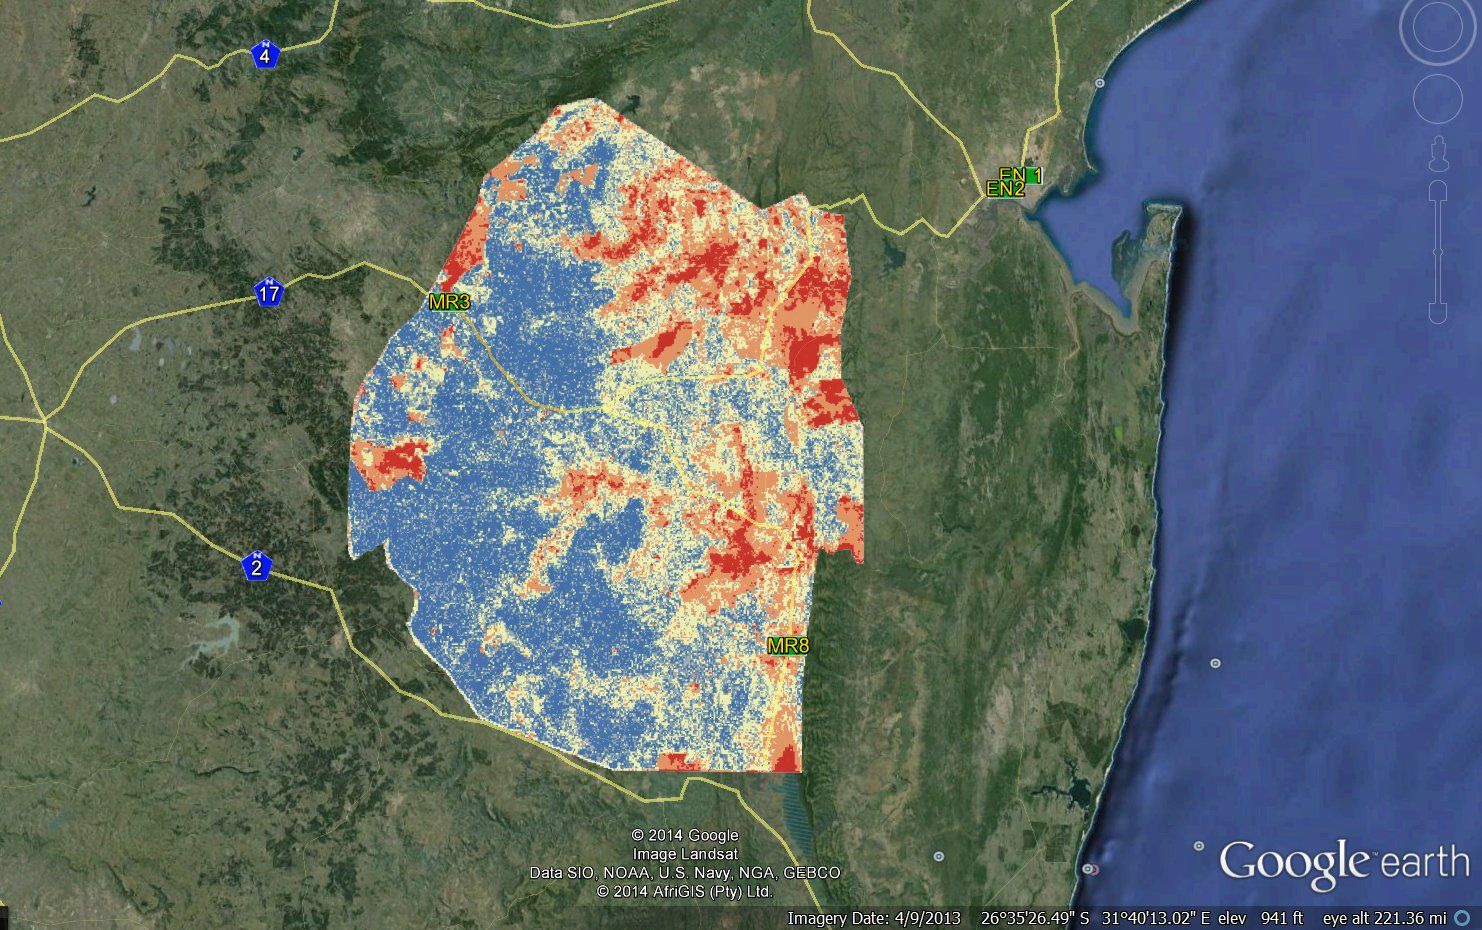 A sample risk map of malaria in Swaziland during the transmission season using data from 2011-2013